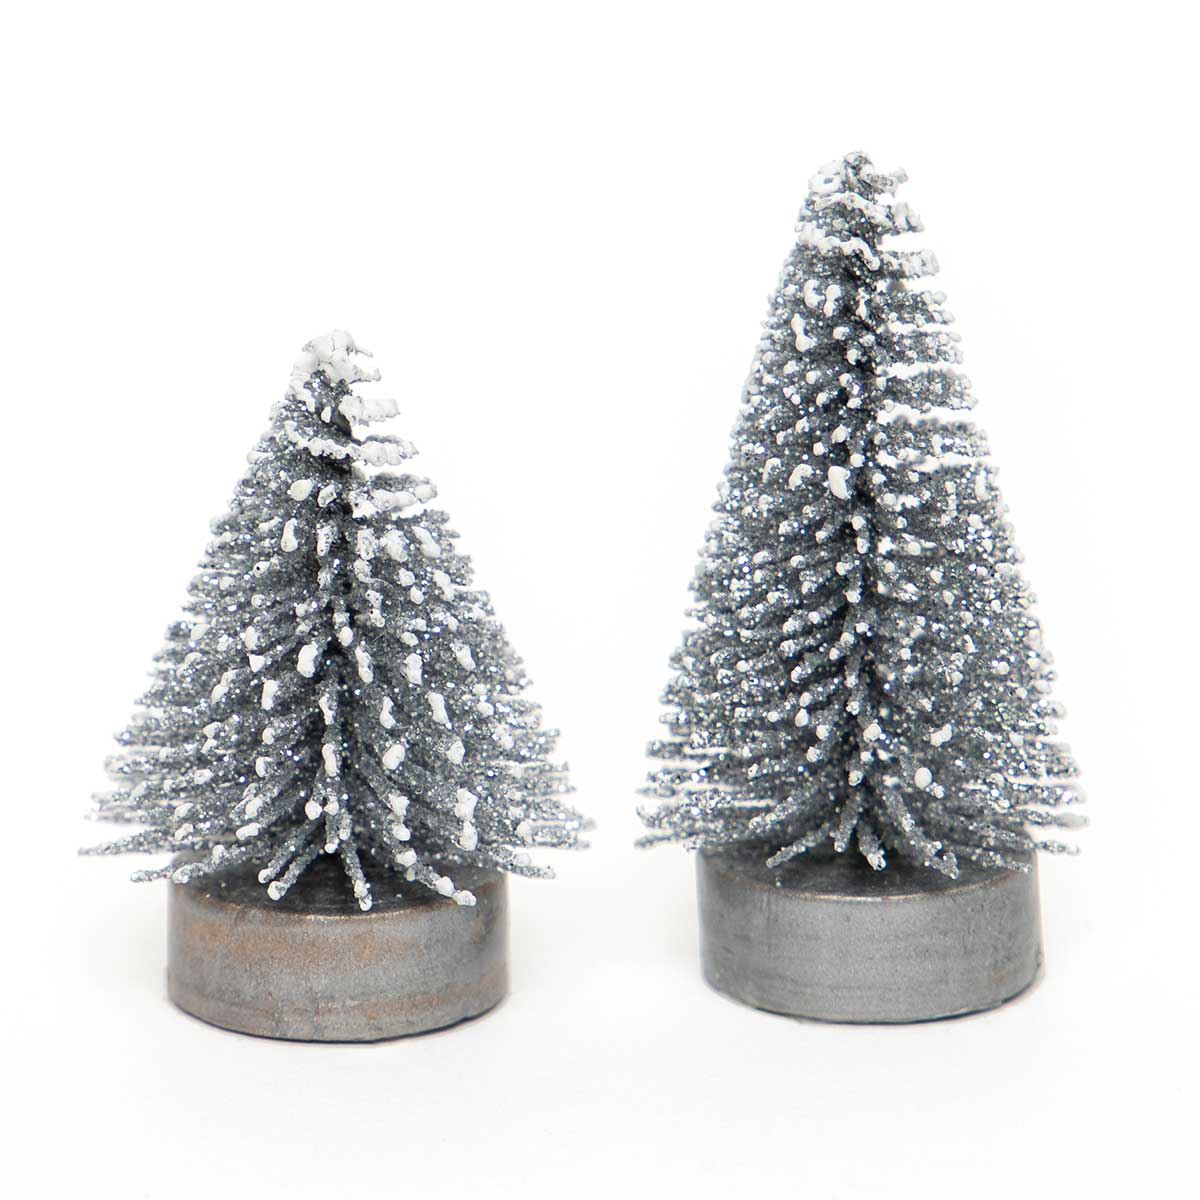 BRISTLE TREE SILVER 2 ASSORTED 1IN X 2IN/1IN X 2.5IN PVC/WOOD